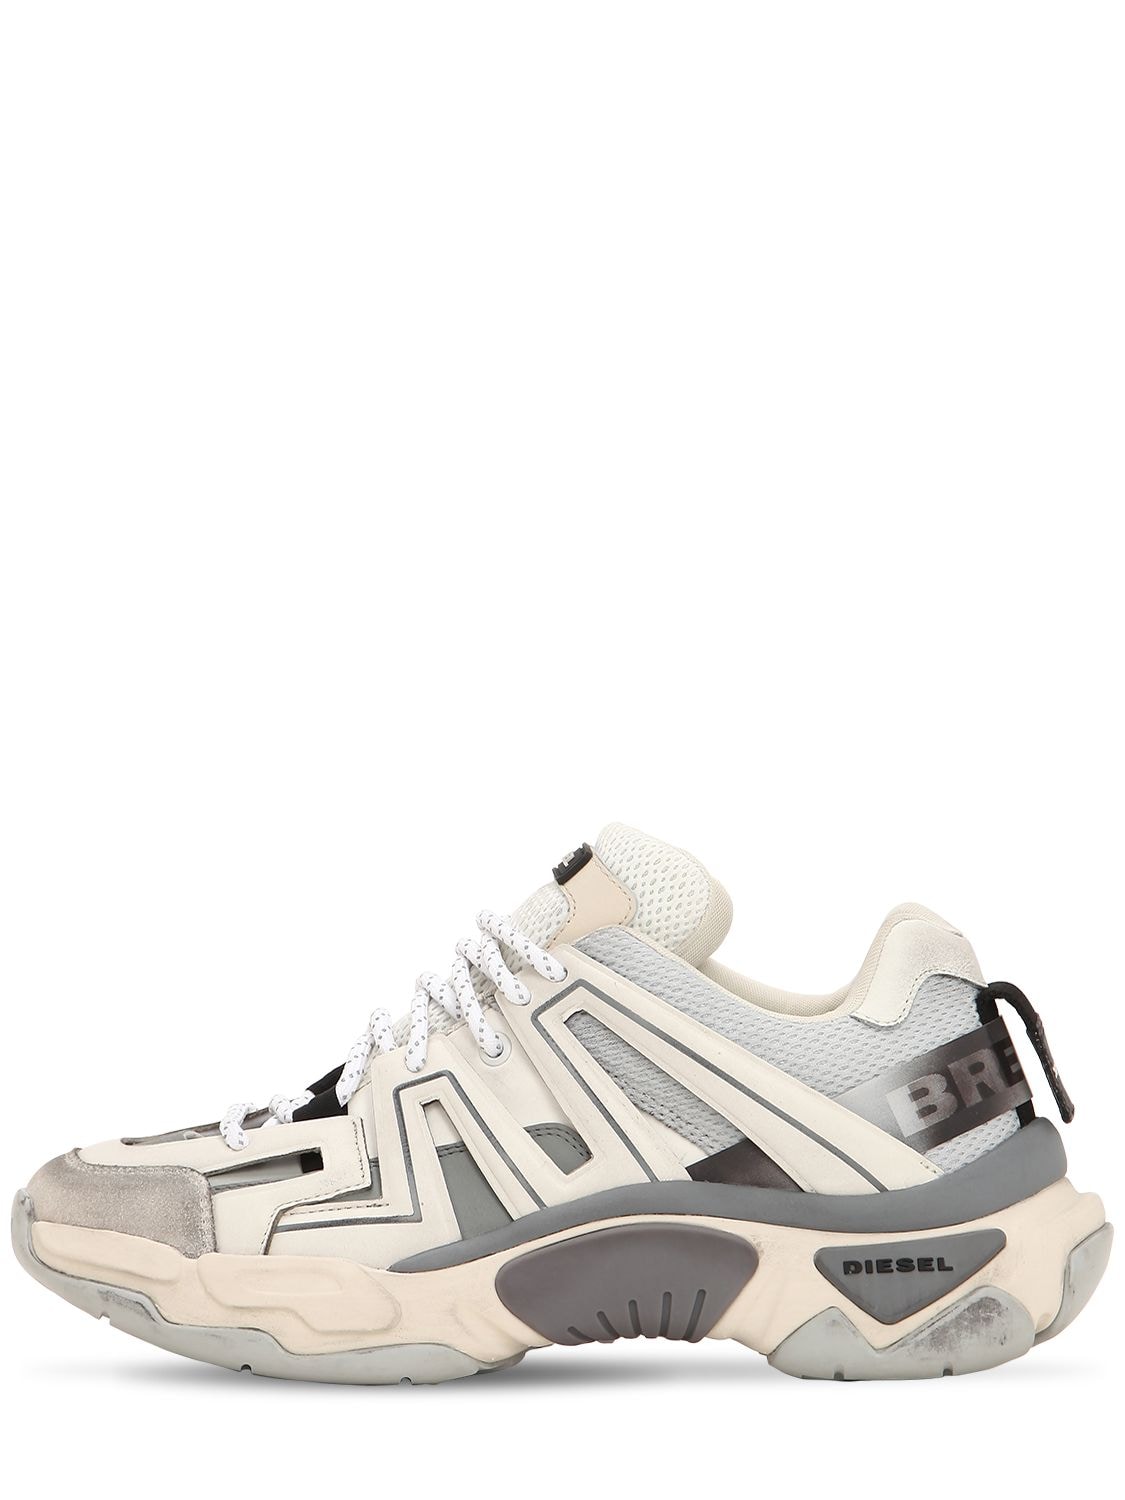 Diesel Techno & Leather Sneakers In White